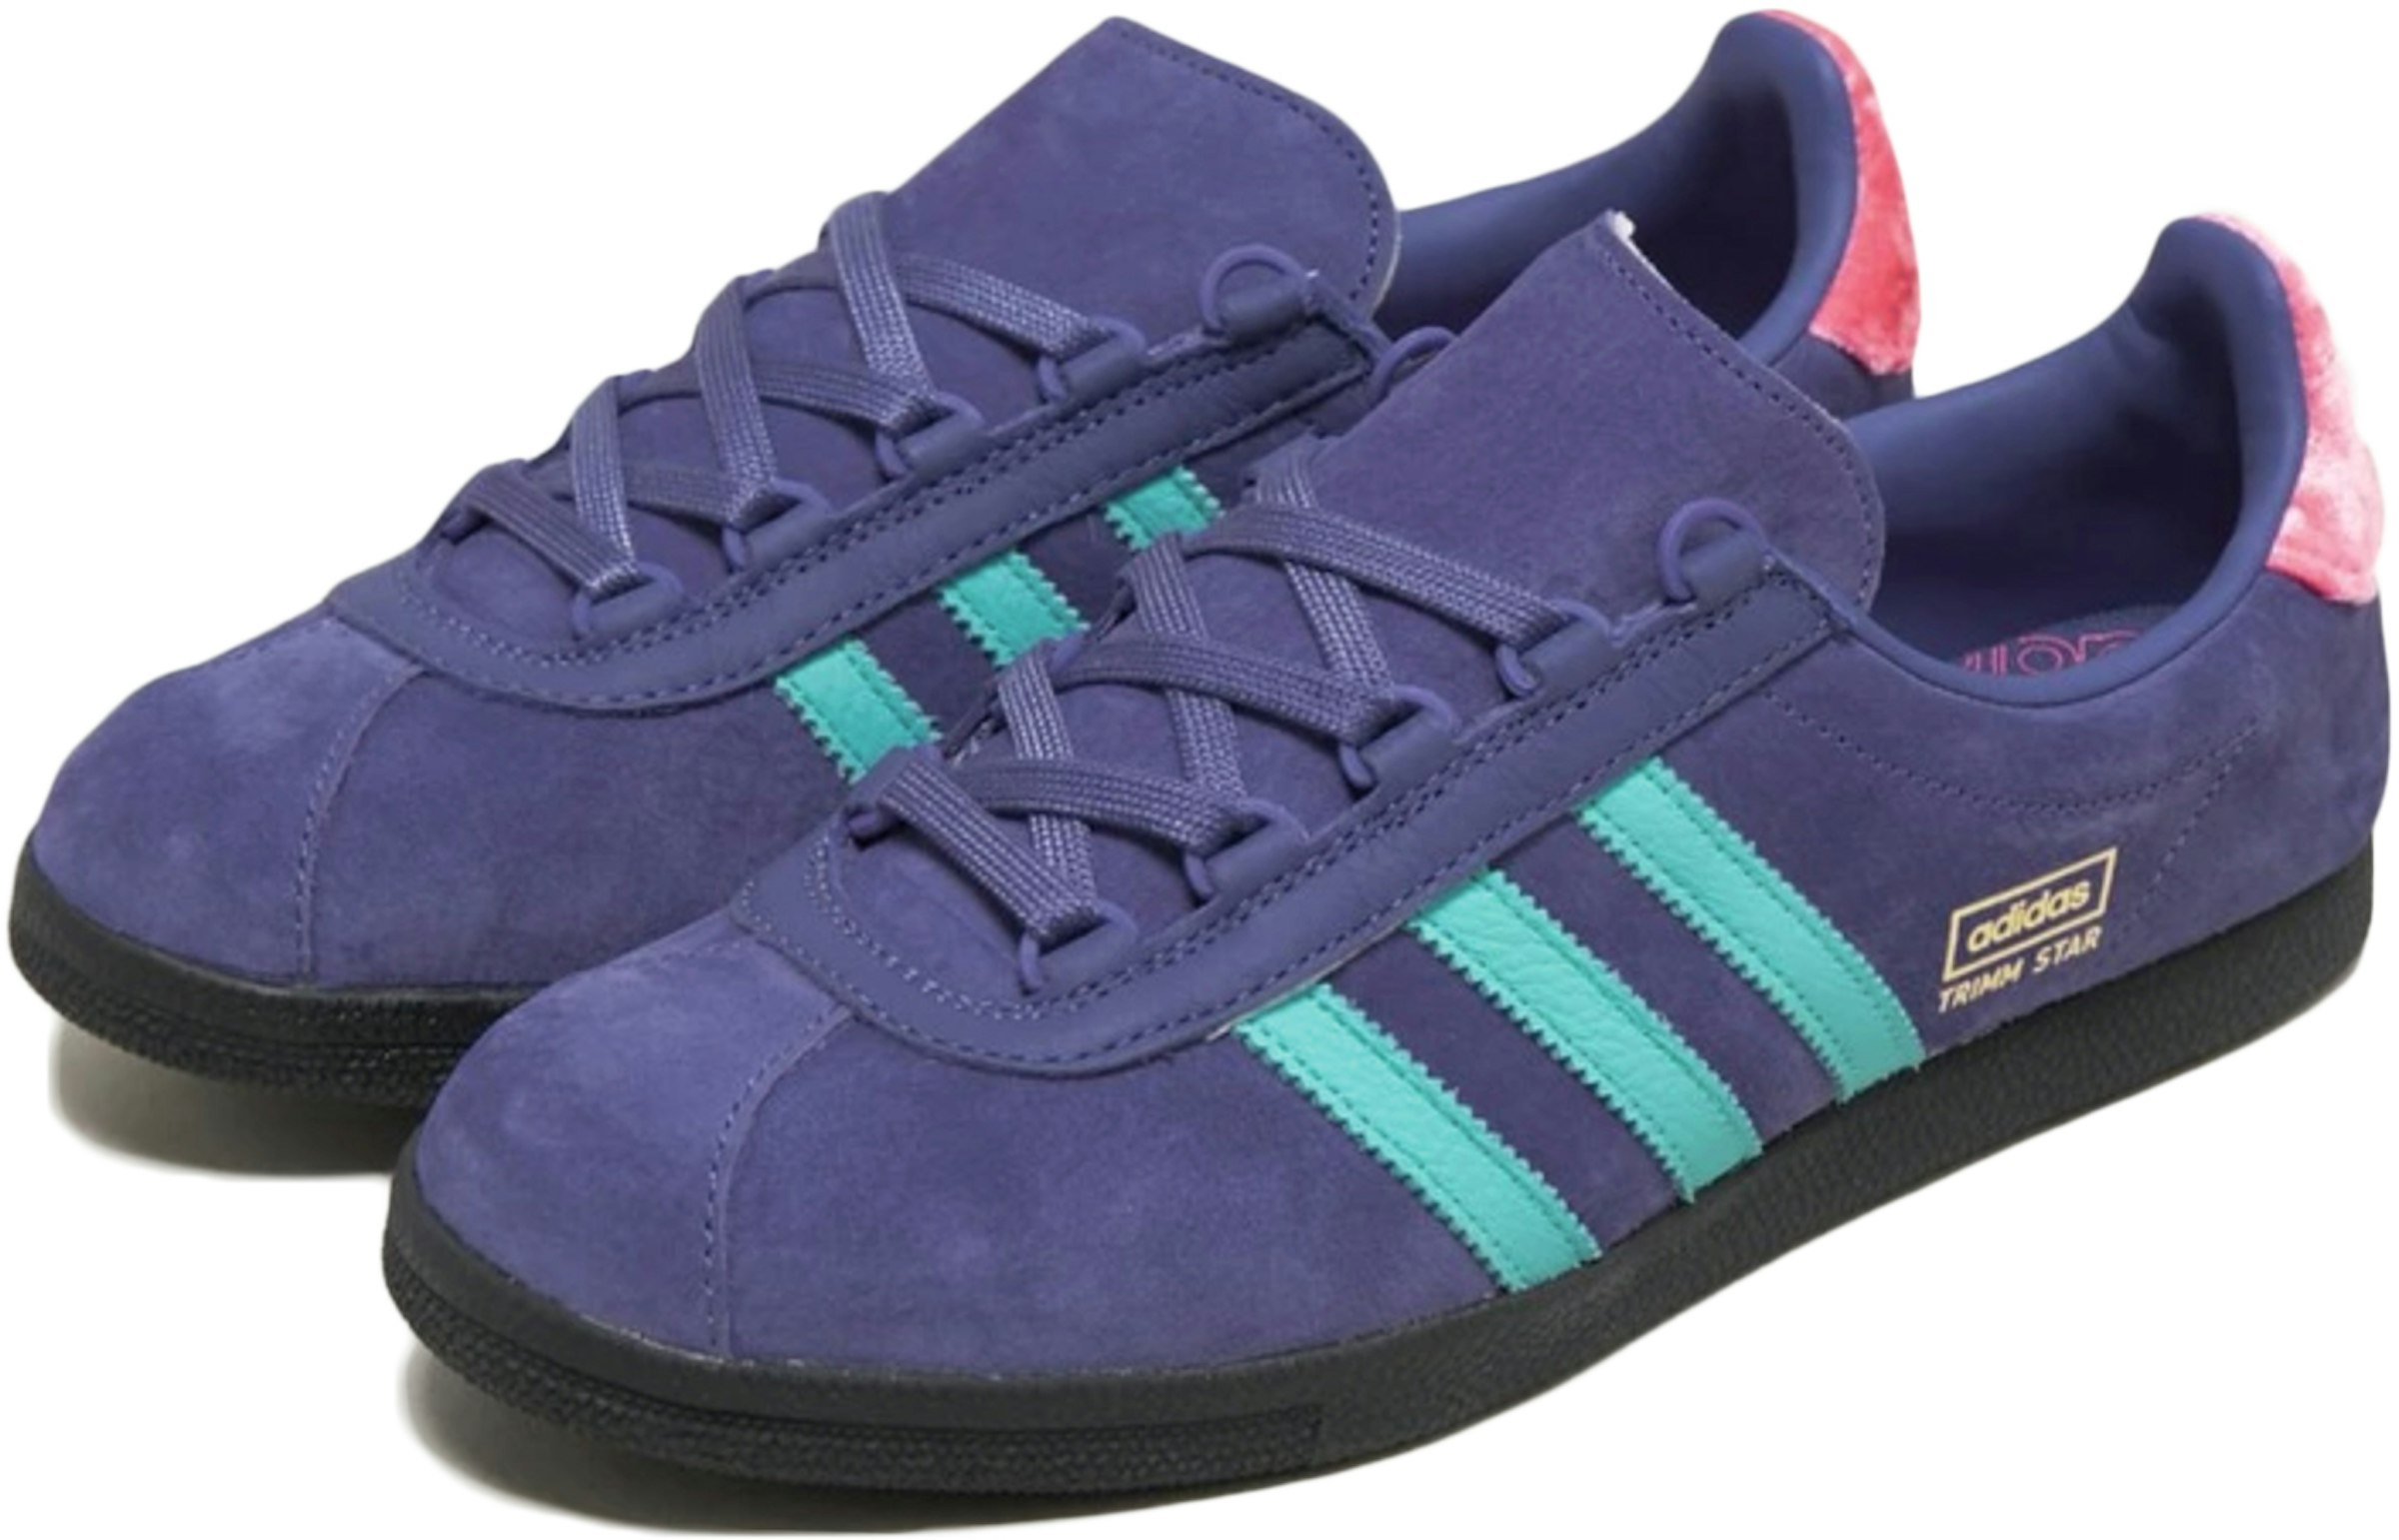 adidas Trimm Star size? The Mark Men's - - US